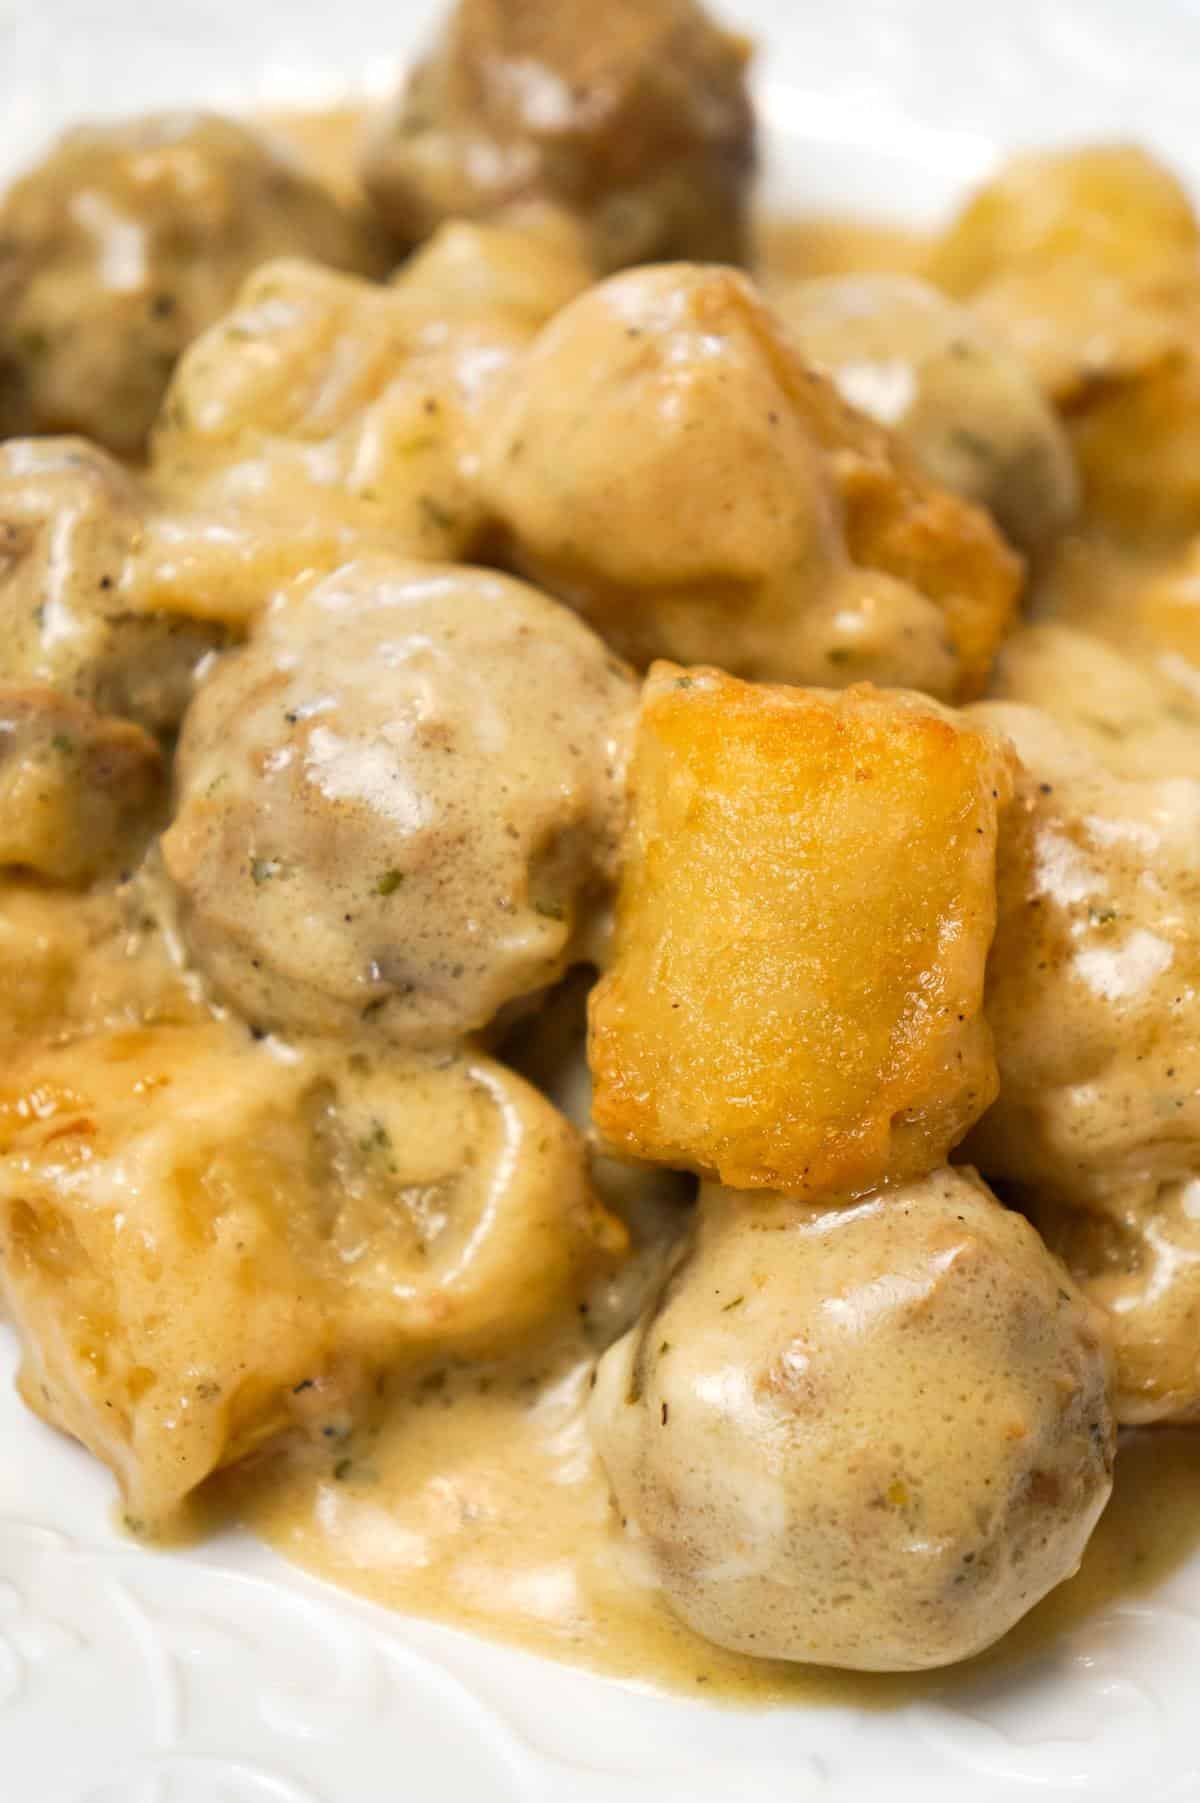 Swedish Meatball Tater Tot Casserole is an easy casserole recipe made with frozen Swedish meatballs smothered in a creamy gravy and topped with mozzarella cheese and tater tots.